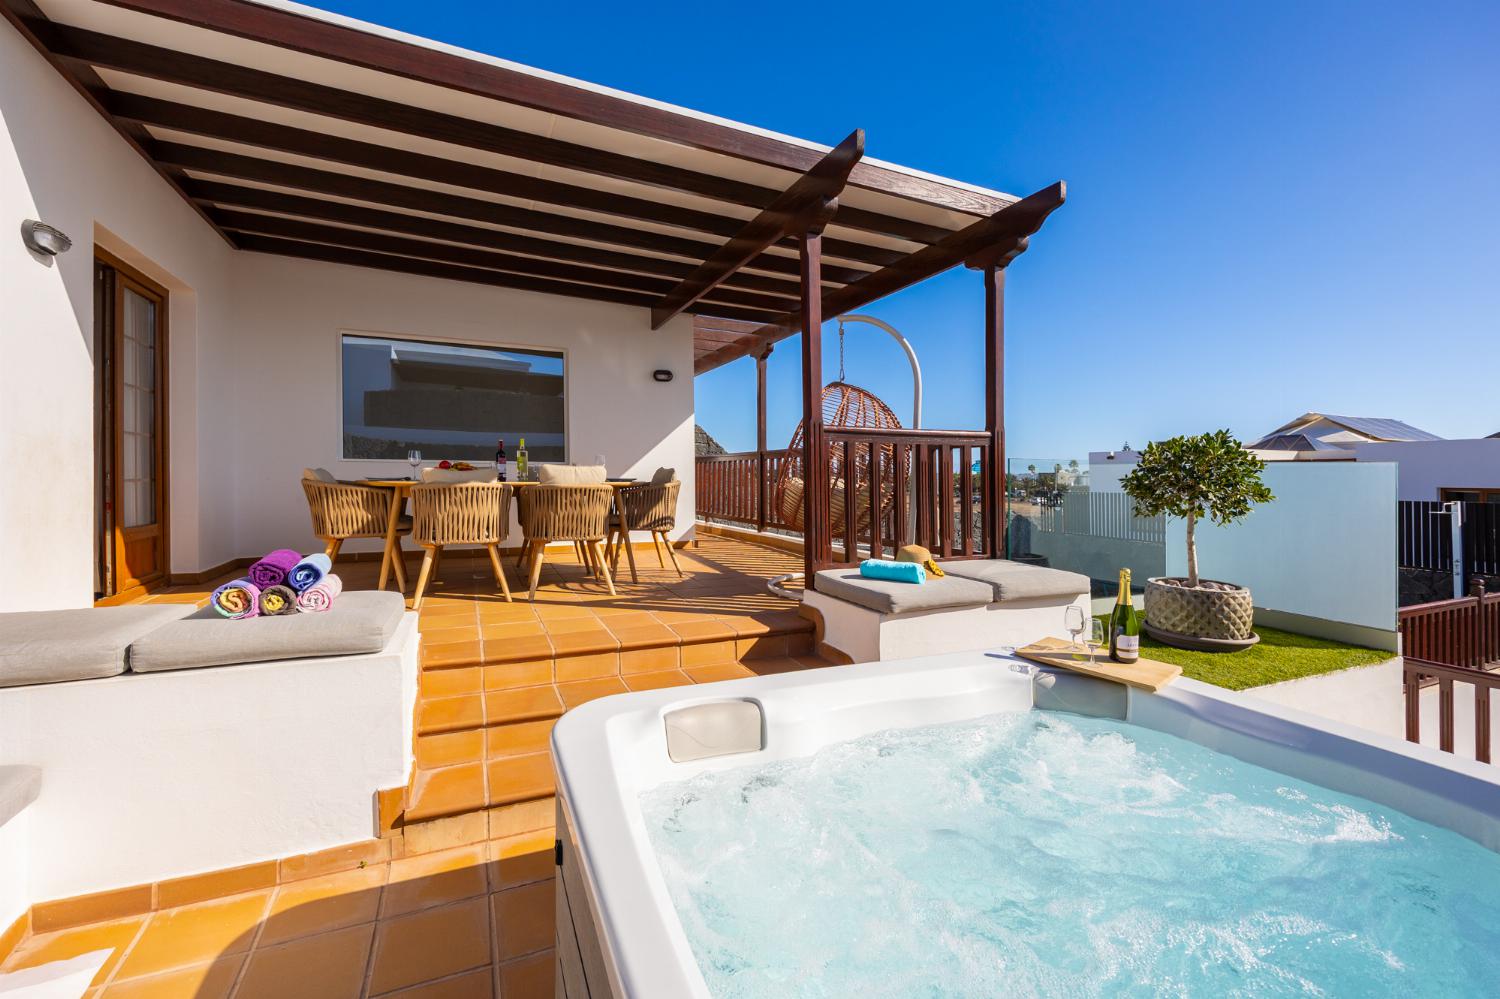 Terrace area with jacuzzi